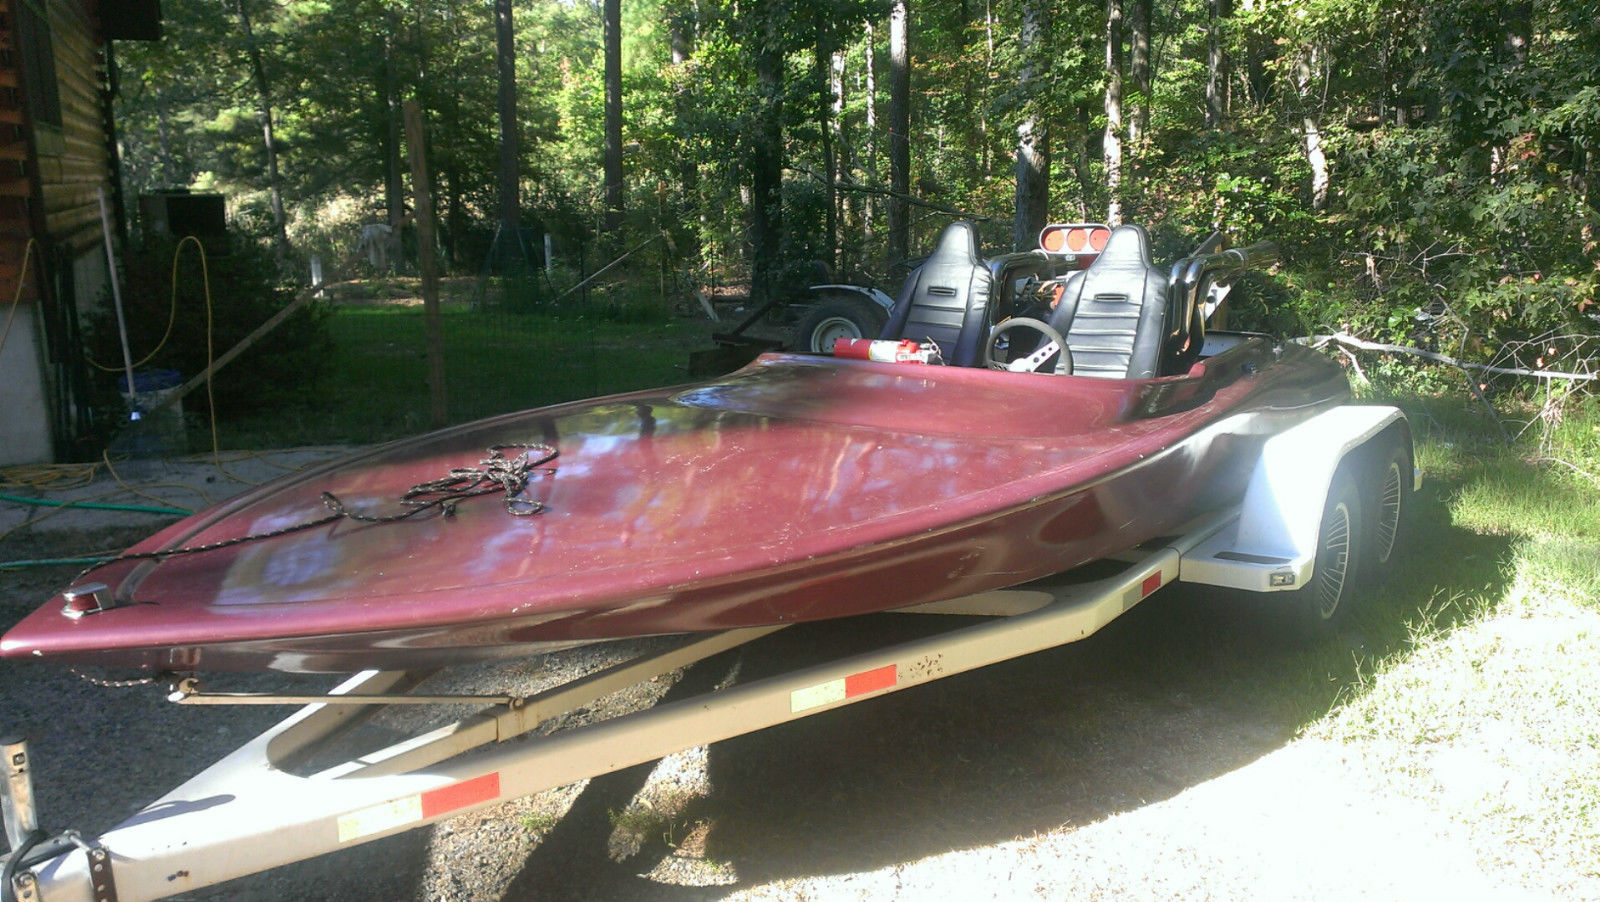 Sanger Flat Bottom 1977 for sale for $6,900 - Boats-from ...